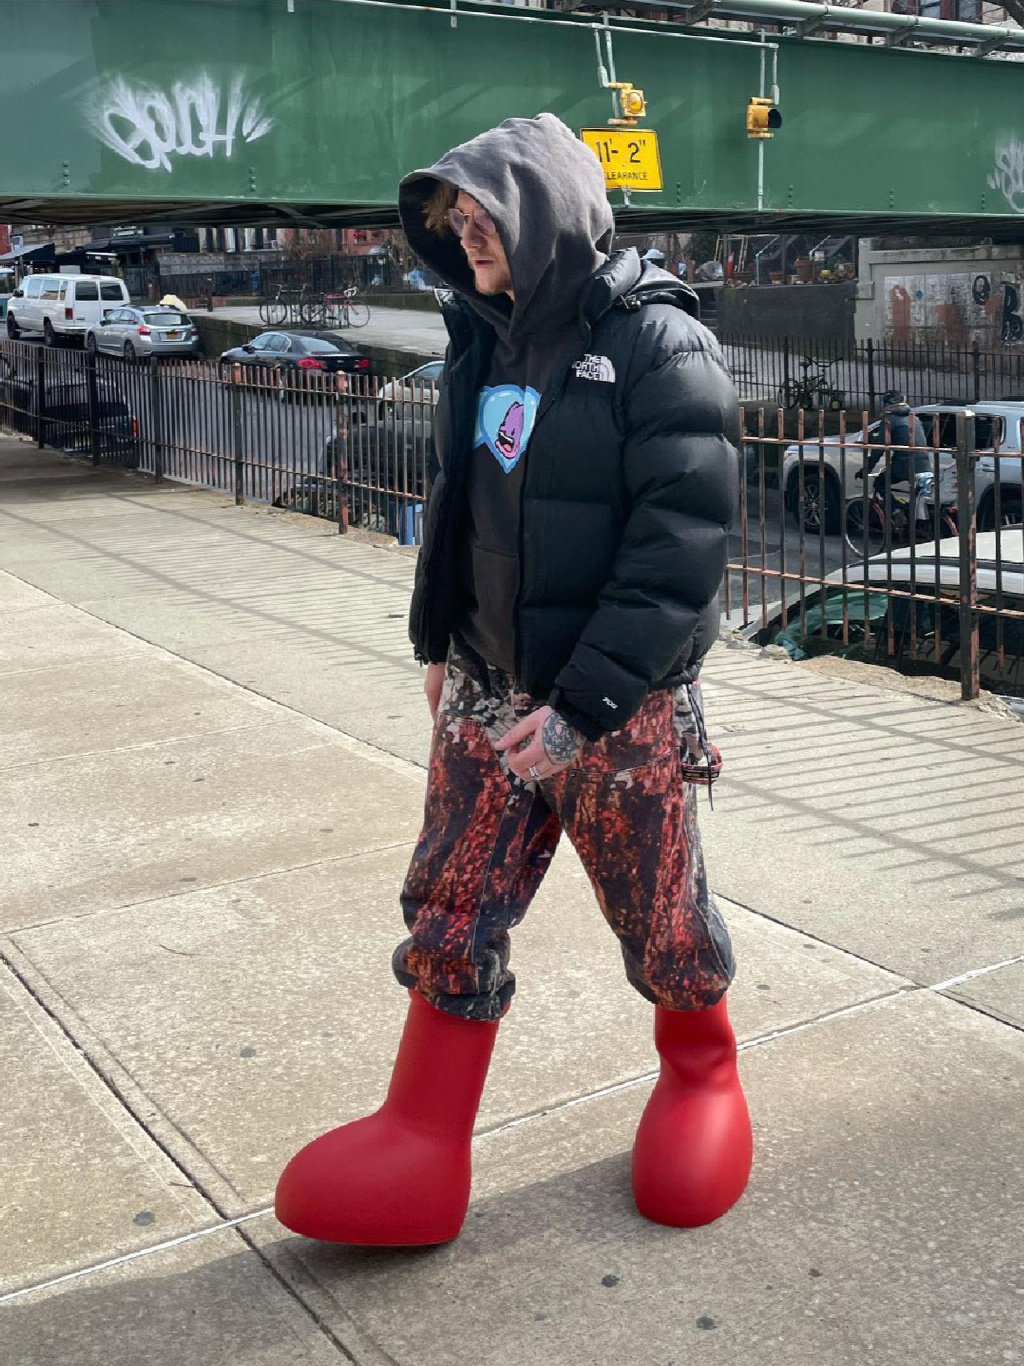 MSCHF Big Red Boots BRB ミスチーフ アトムブーツ